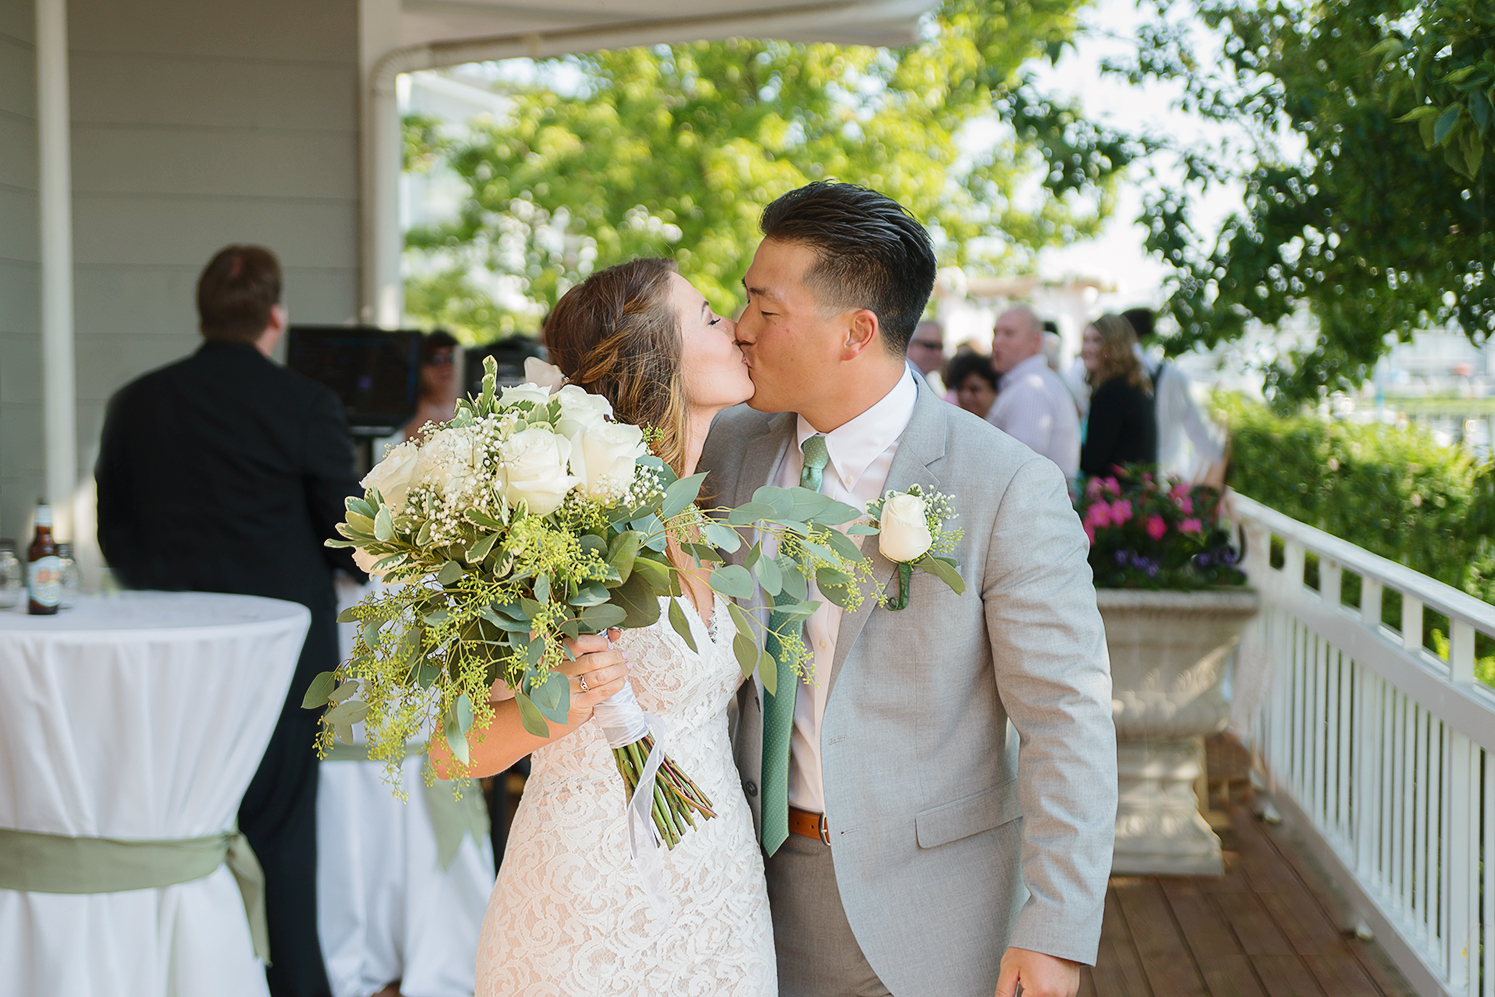 Bride and groom kiss after the wedding ceremony in annapolis